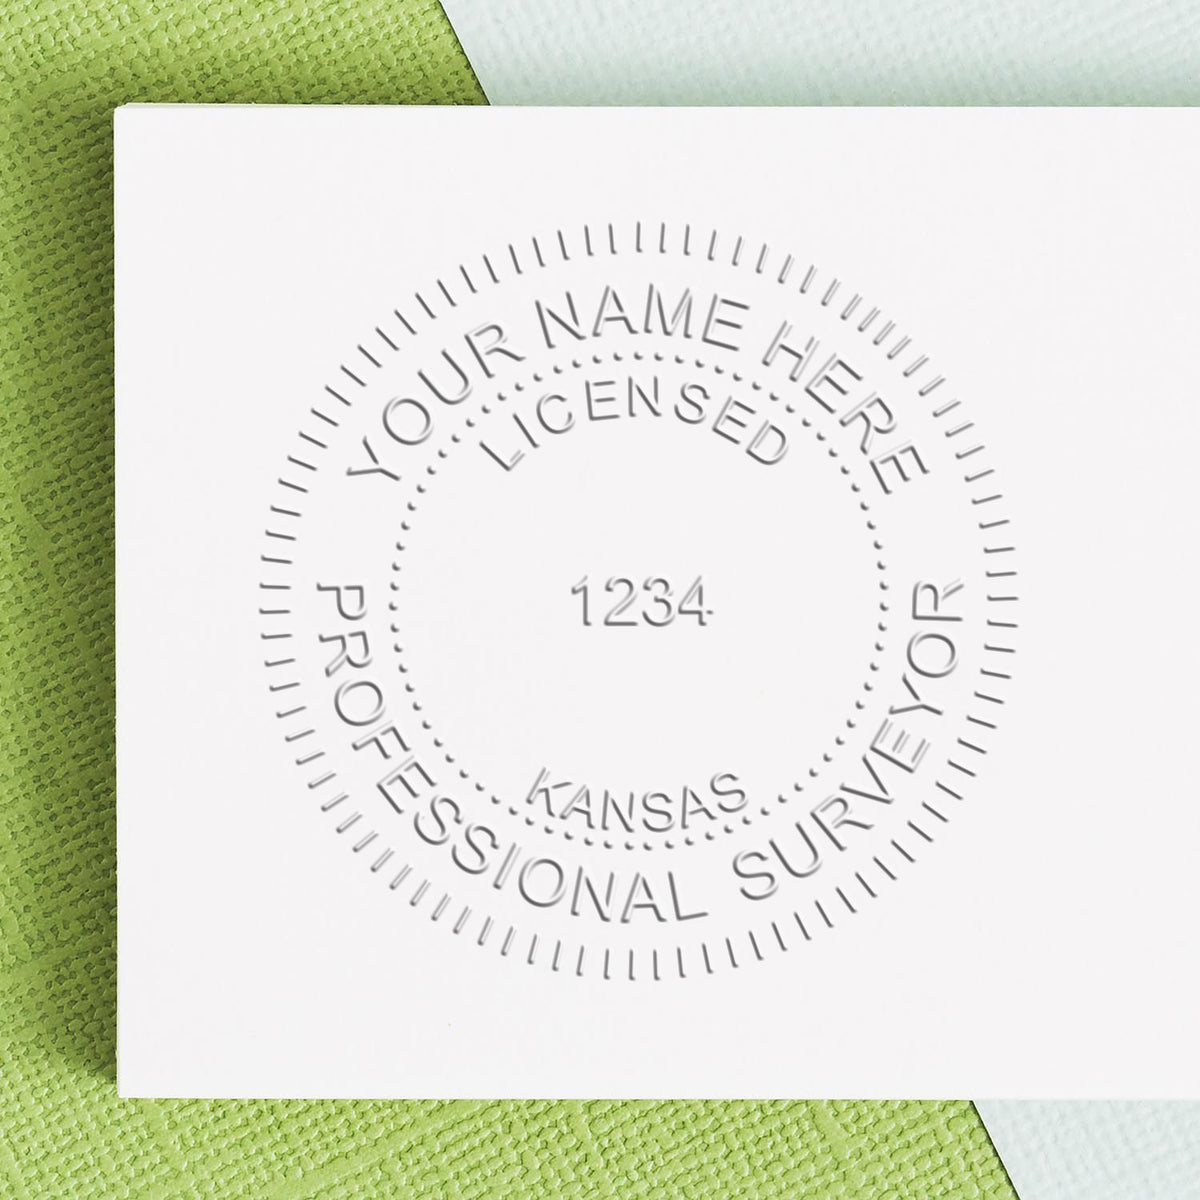 An in use photo of the Gift Kansas Land Surveyor Seal showing a sample imprint on a cardstock